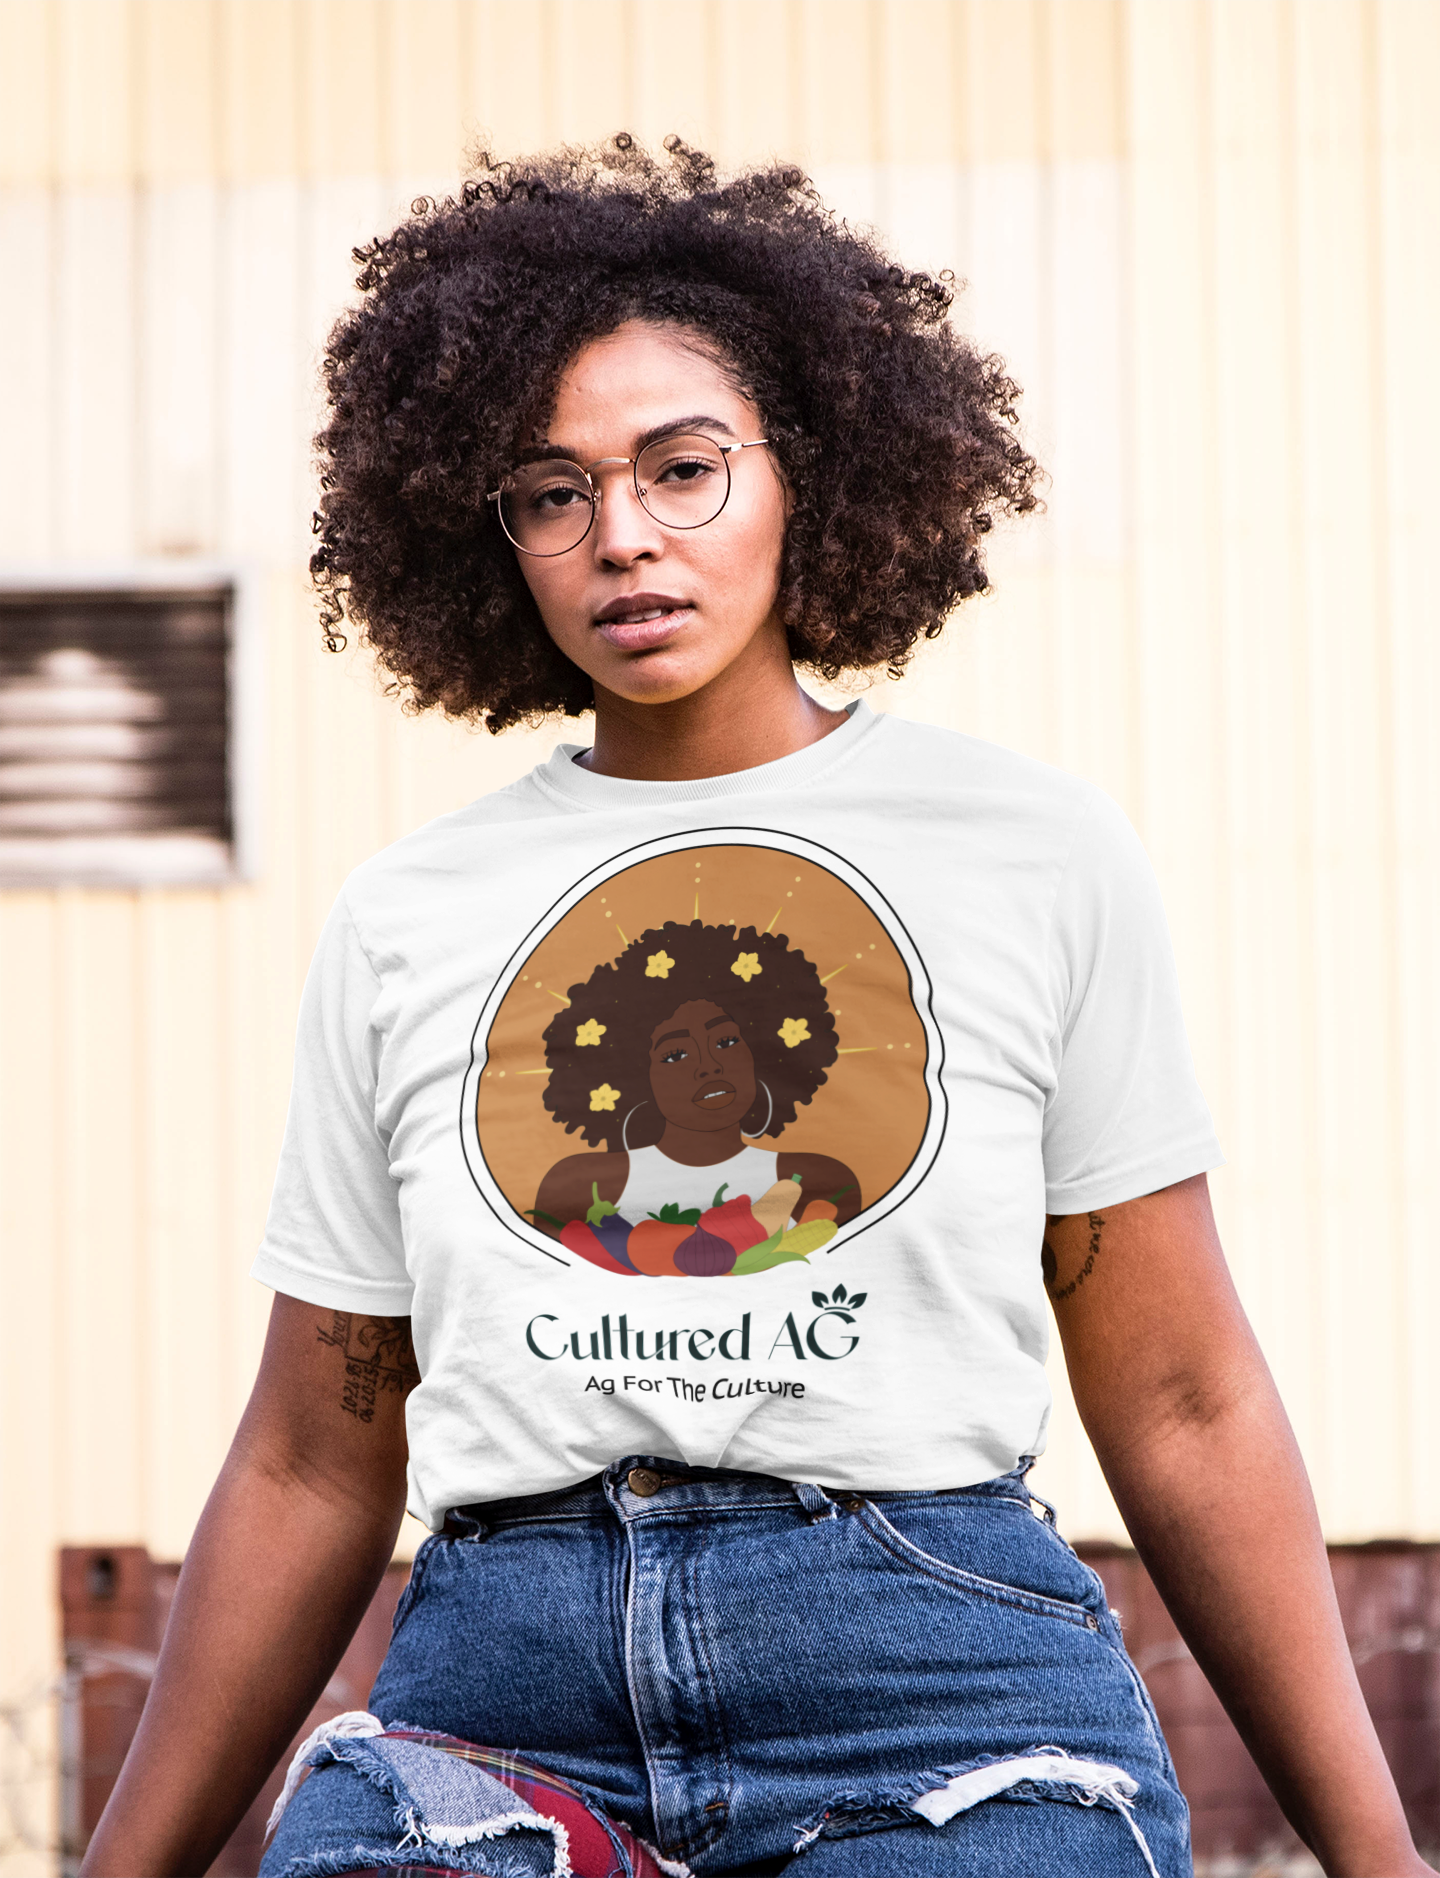 AG for the Culture Unisex T-Shirt - Candace